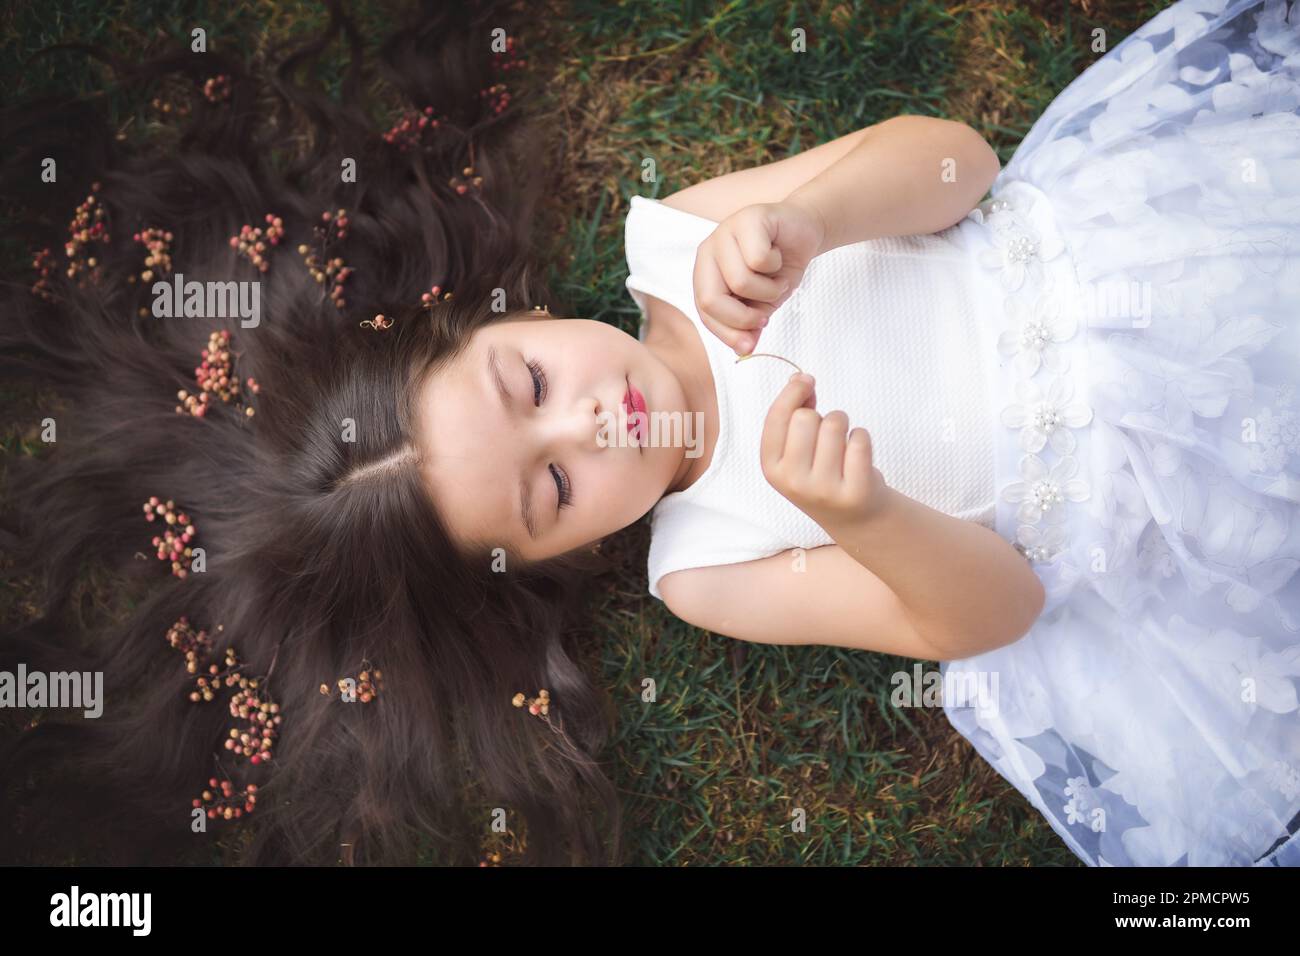 Little girl in white dress lying on the grass, she is smiling, her hair is very long and princess-like, she plays with her hands on the theme of child Stock Photo